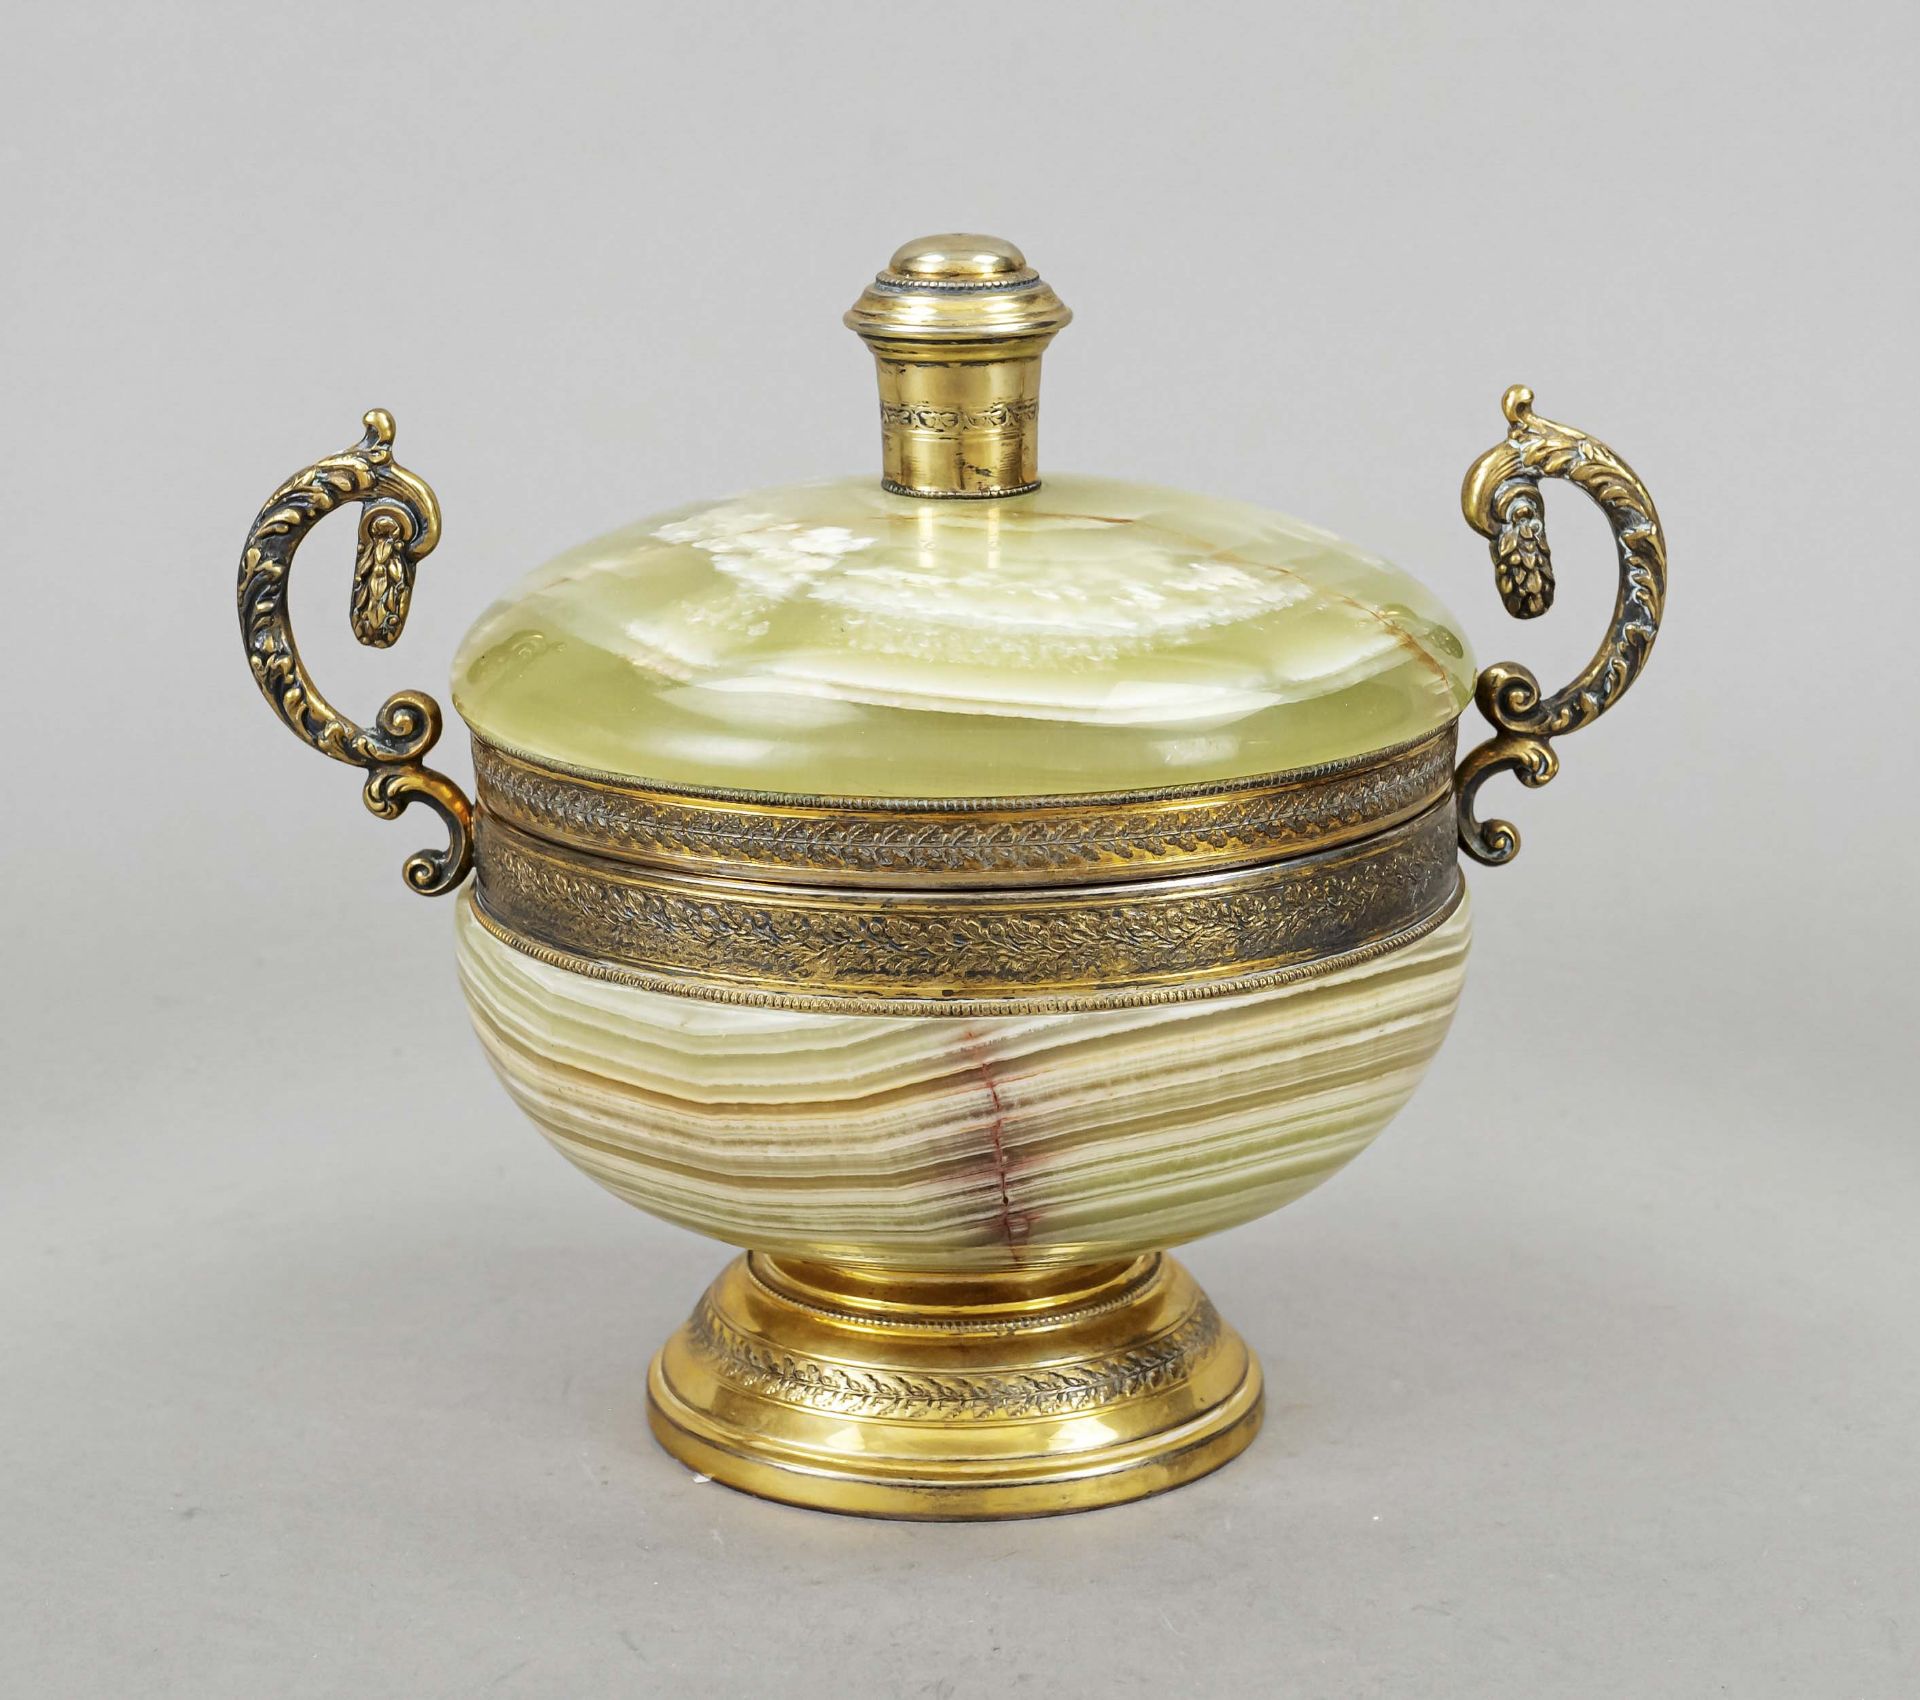 Marble lidded box with silver mounting, Italy, 2nd half 20th century, maker's mark Fabricia